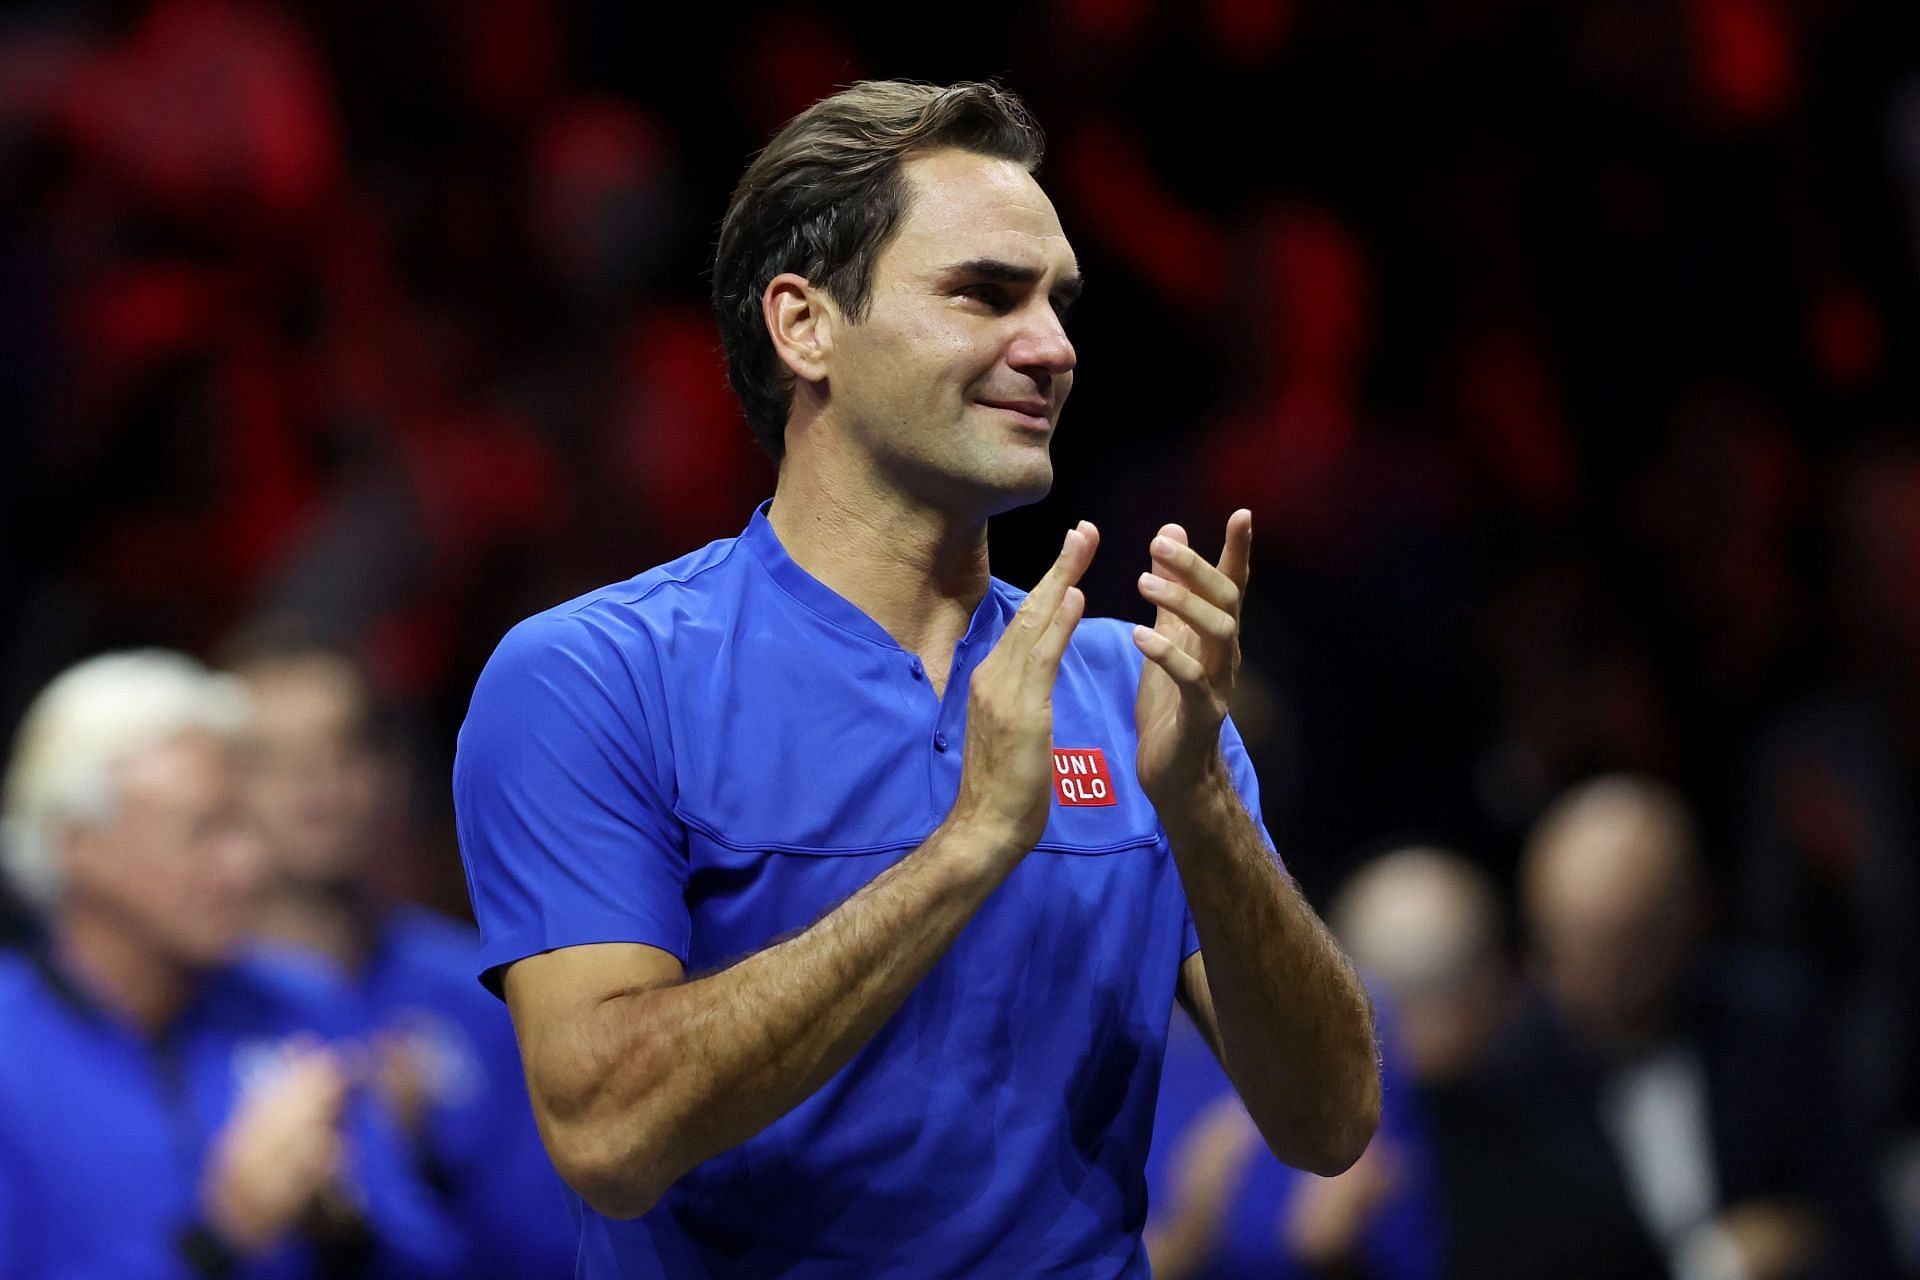 Roger Federer acknowledging the crowd at the O2 Arena